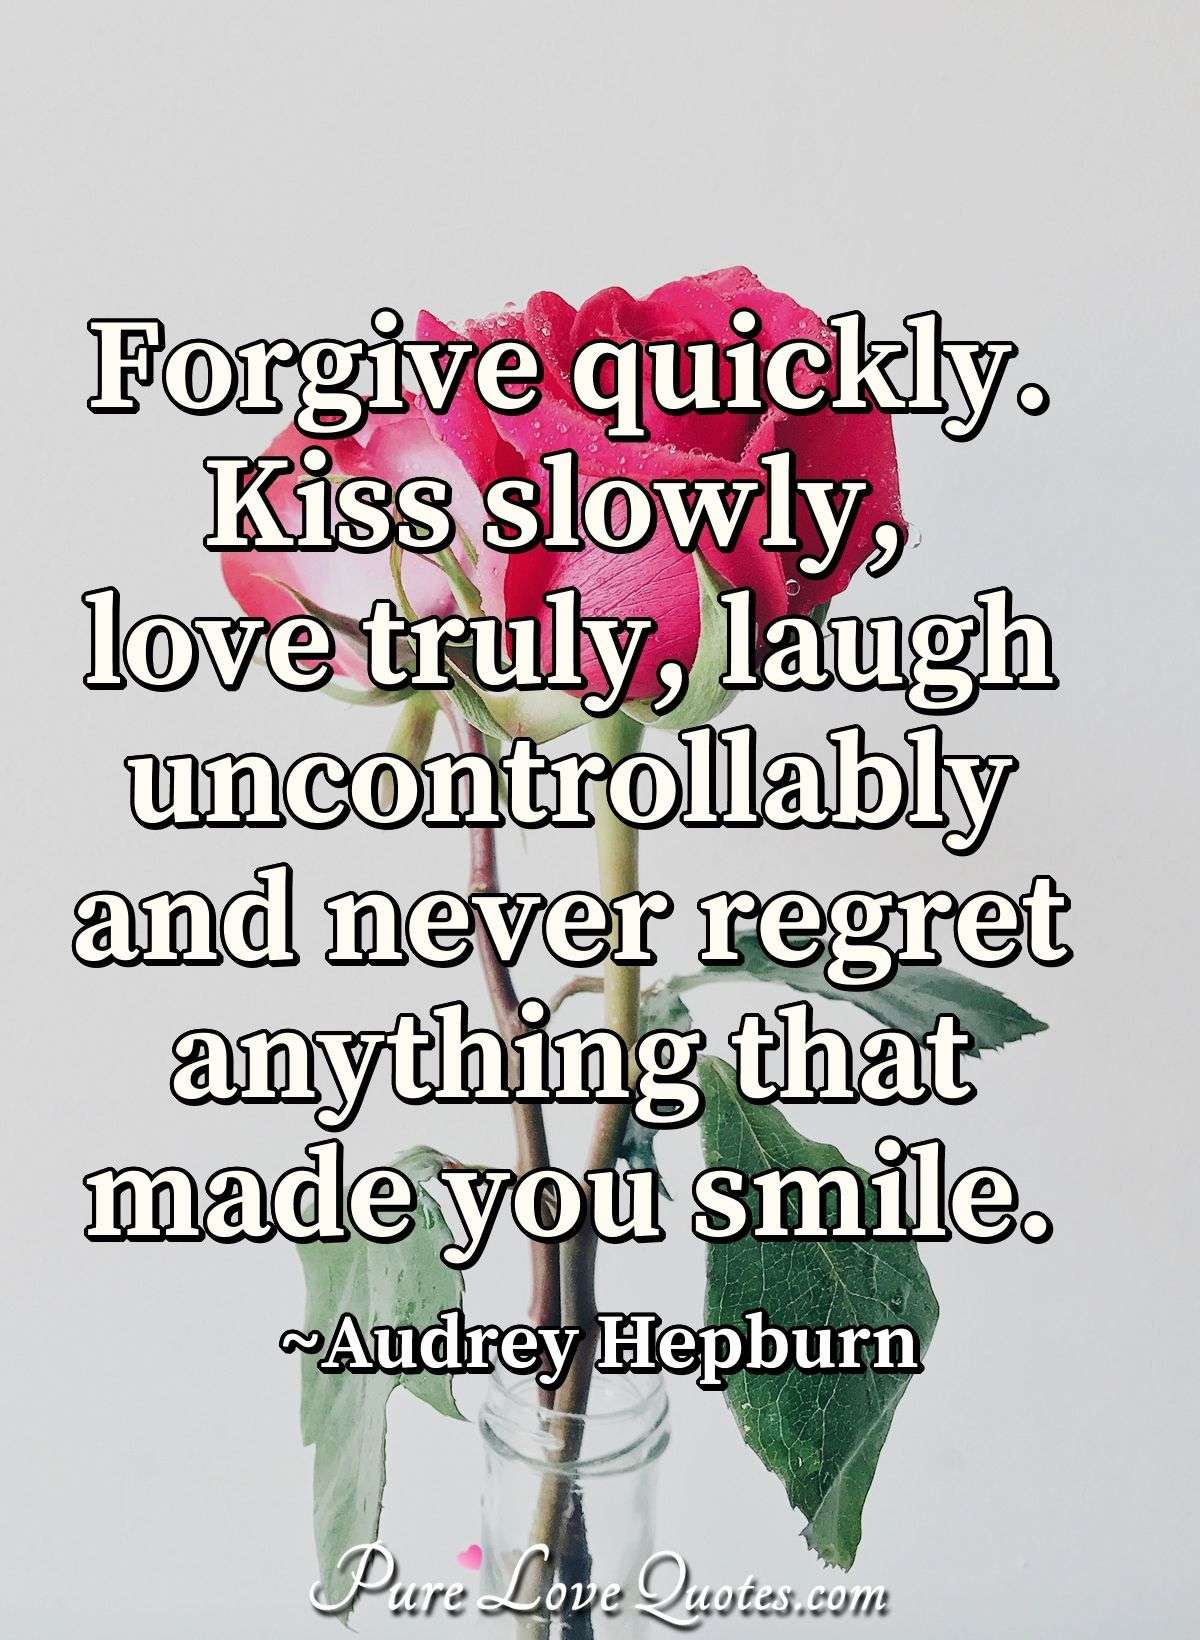 Forgive quickly. Kiss slowly, love truly, laugh uncontrollably and never regret anything that made you smile. - Audrey Hepburn